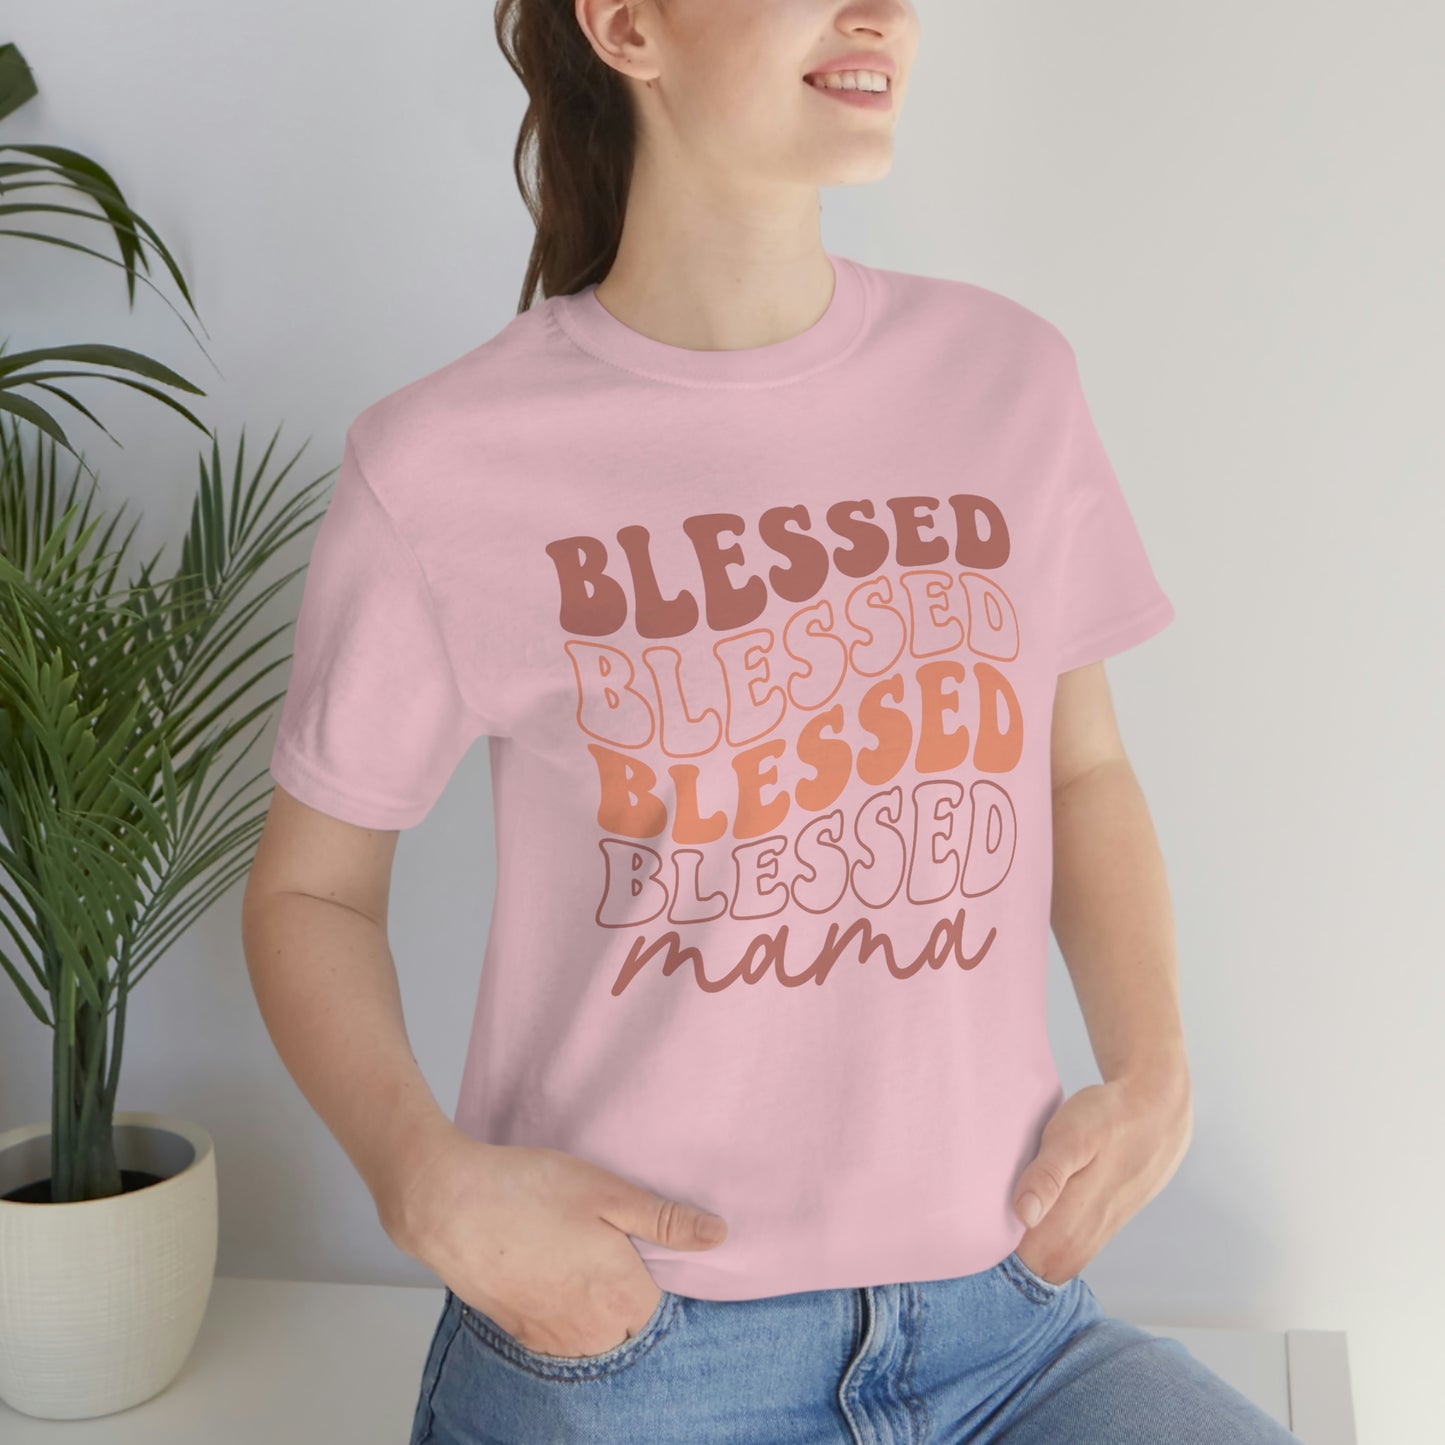 Blessed Mama T-shirt Unisex Jersey Short Sleeve Tee-Mother's Day Blessed Mom